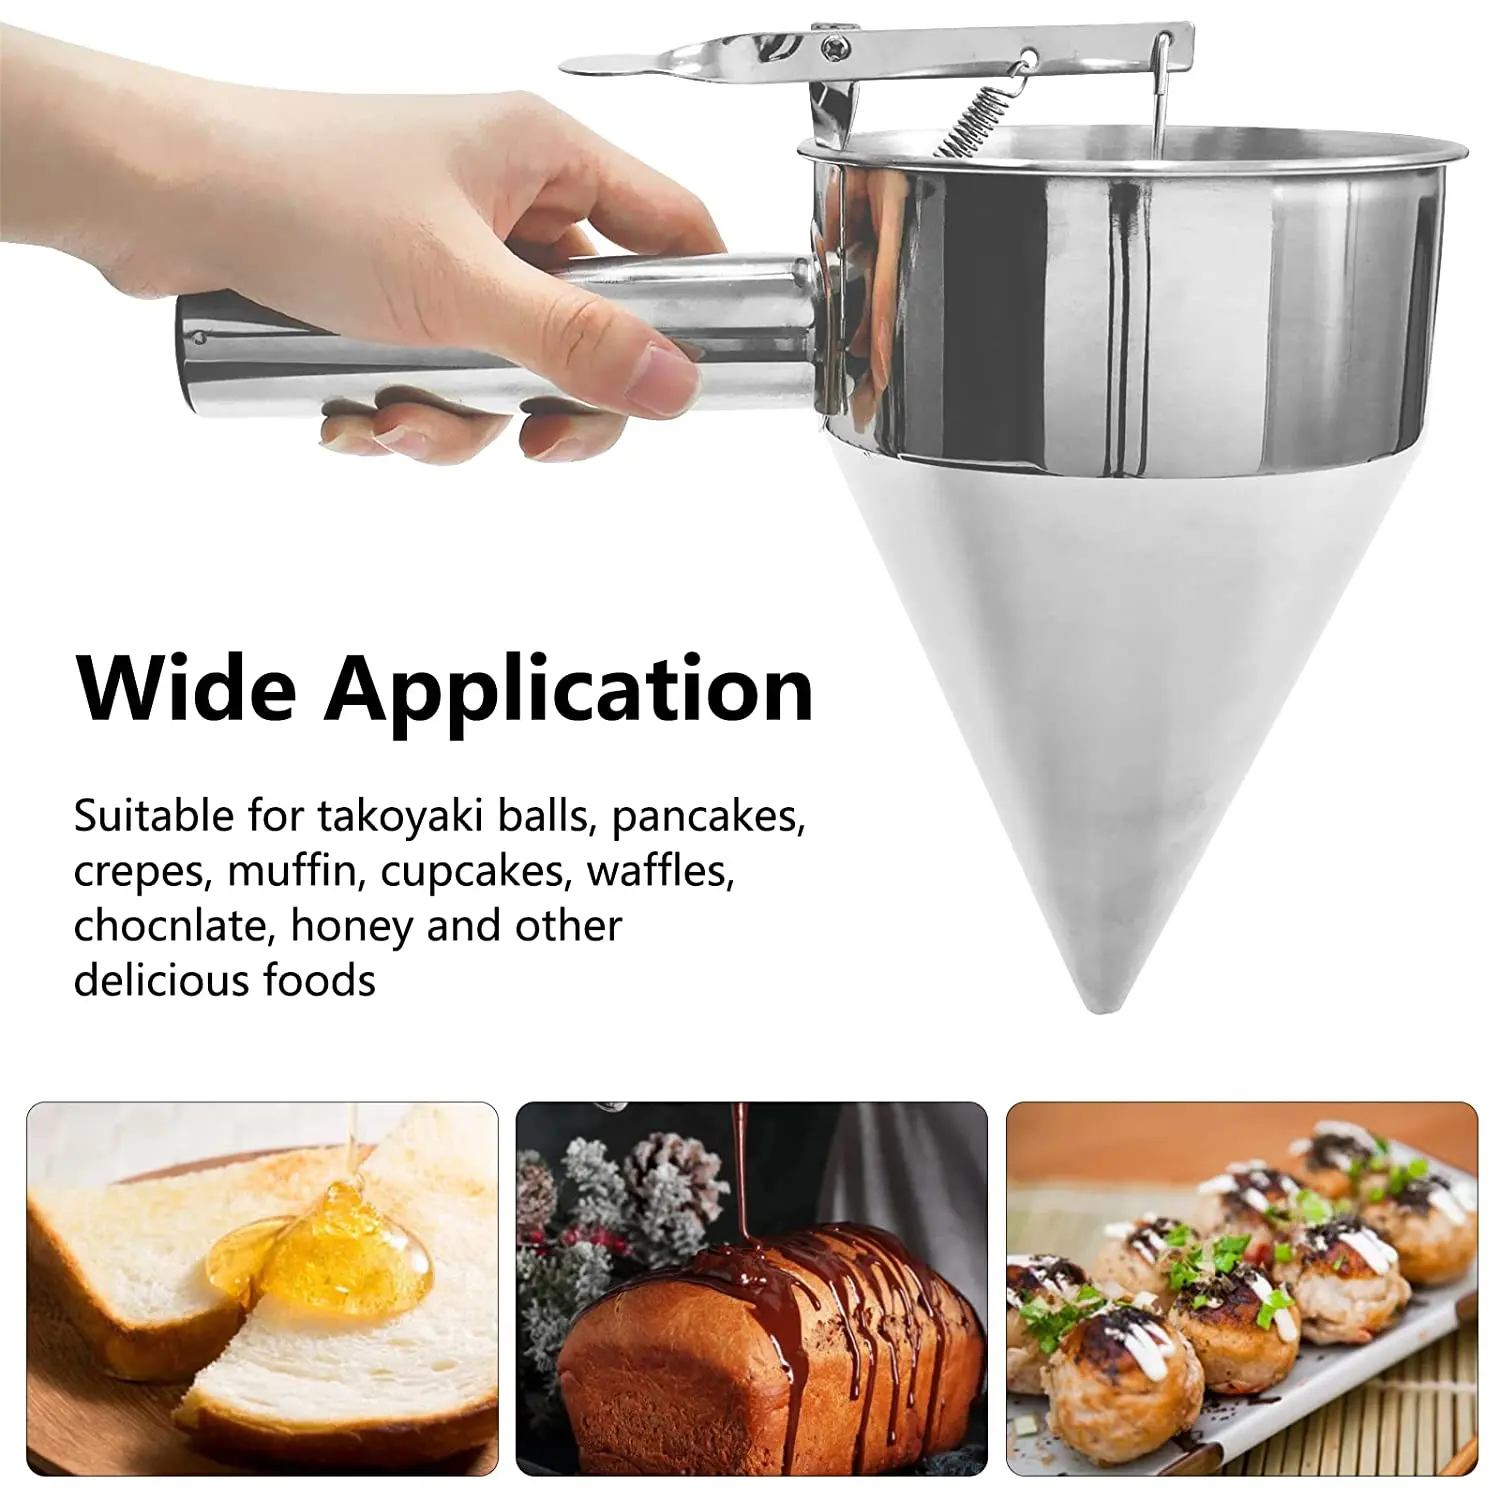 Pancake Batter Dispenser, Multi-caliber Stainless Steel Funnel Cake  Dispenser with Stand Great for Pancakes, Cupcakes or Any Baked Goods